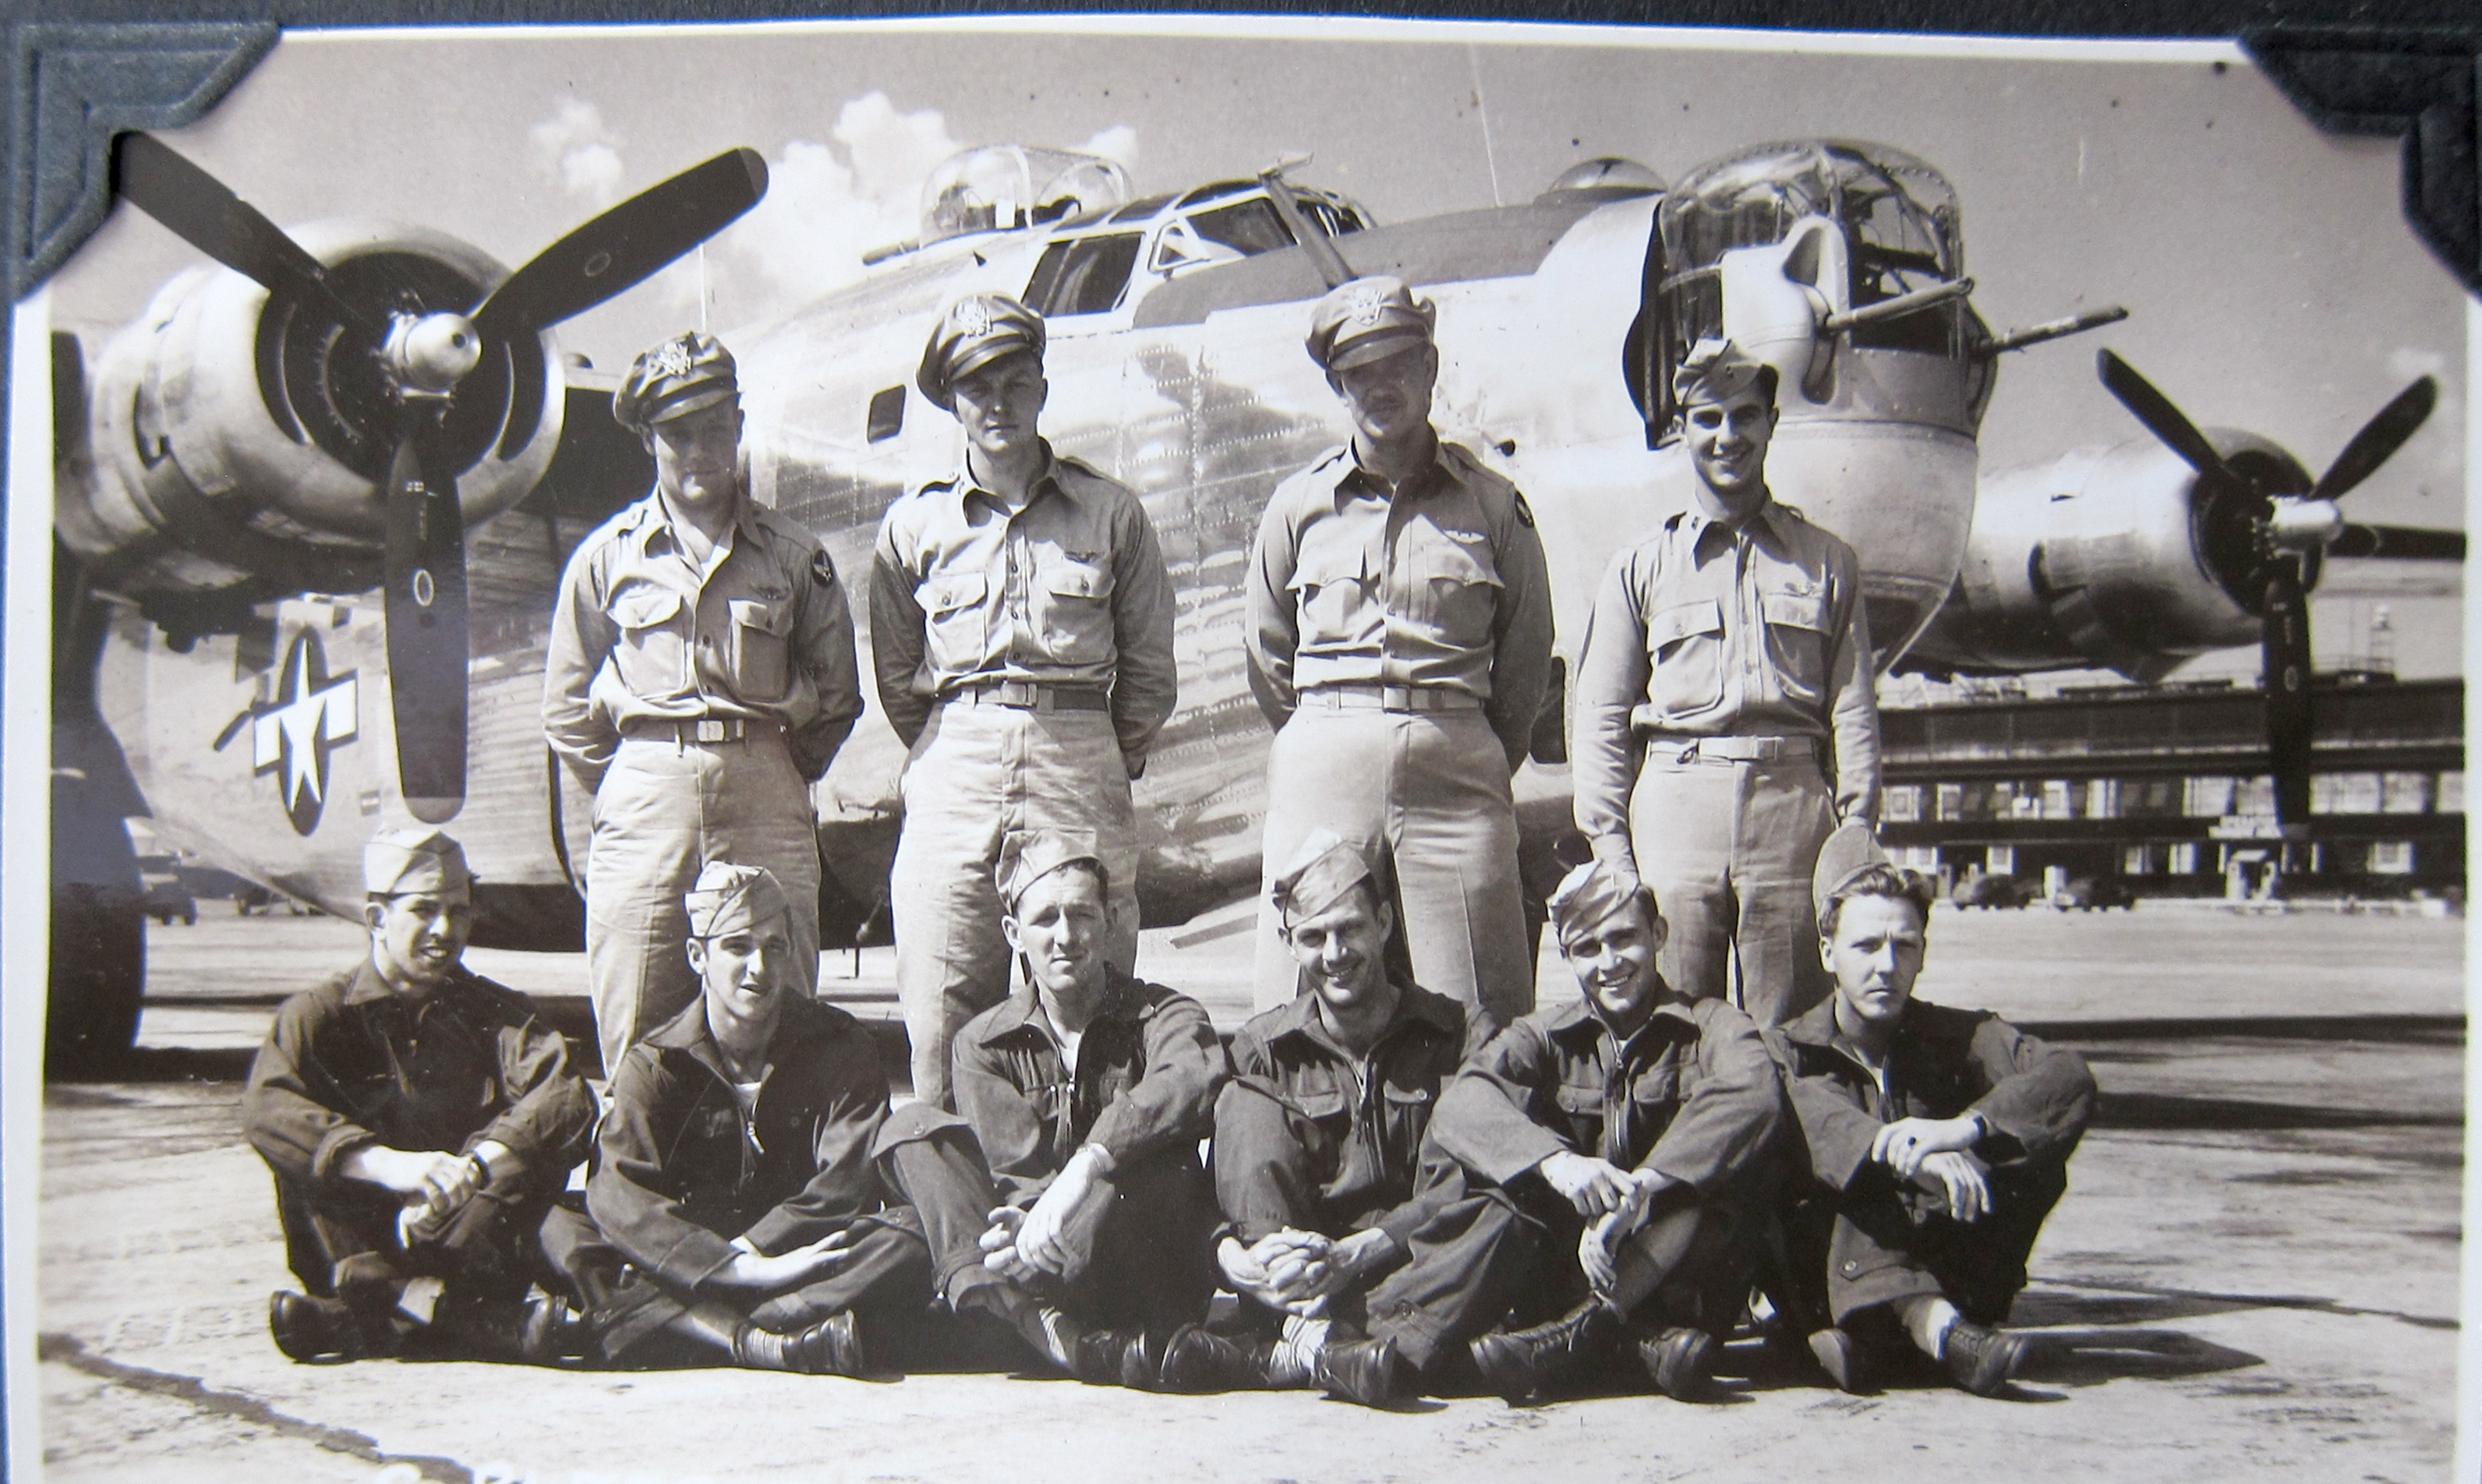 Maplewood History: Bob Irwin in Service to Our Country During WWII